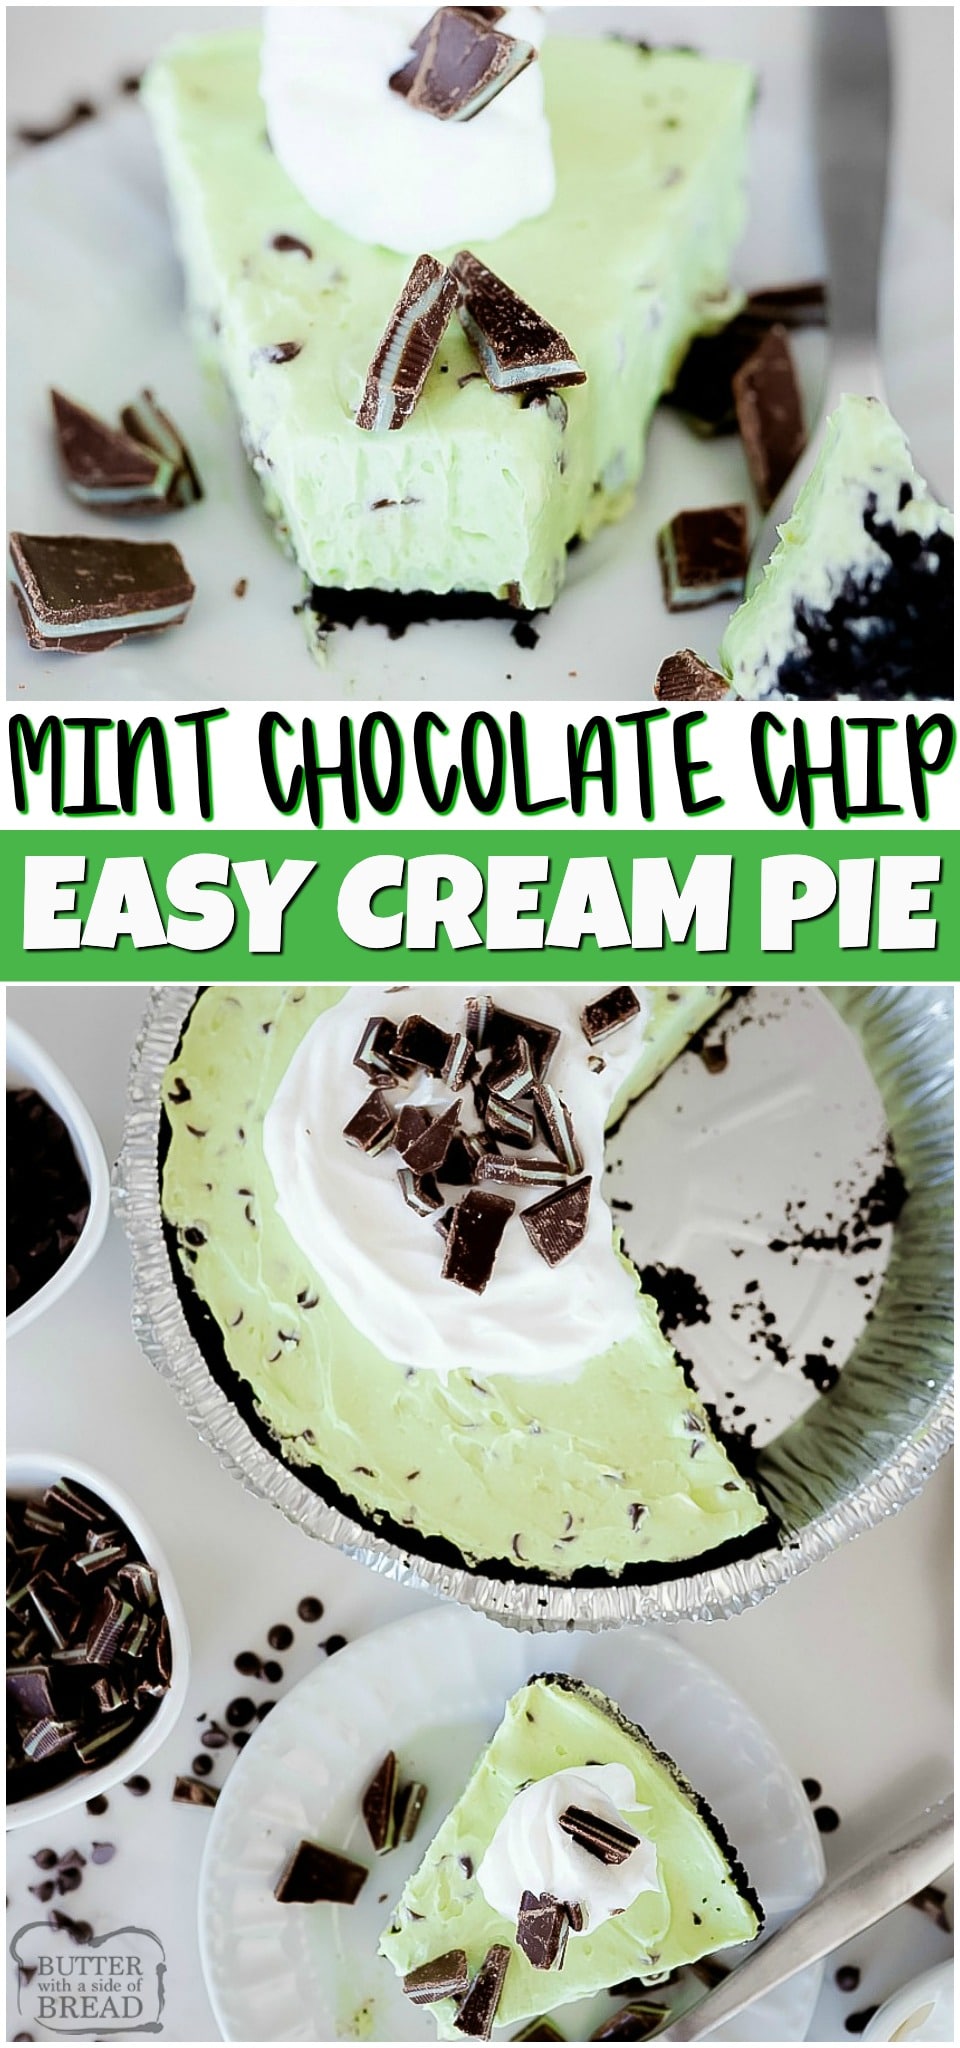 Mint Chocolate Chip Cream Pie is a creamy mint pie loaded with chocolate chips! This easy pie recipe has smooth mint cream filling mixed with chocolate chips & Andes mints all in an Oreo pie crust. Chocolate Mint lovers rejoice!